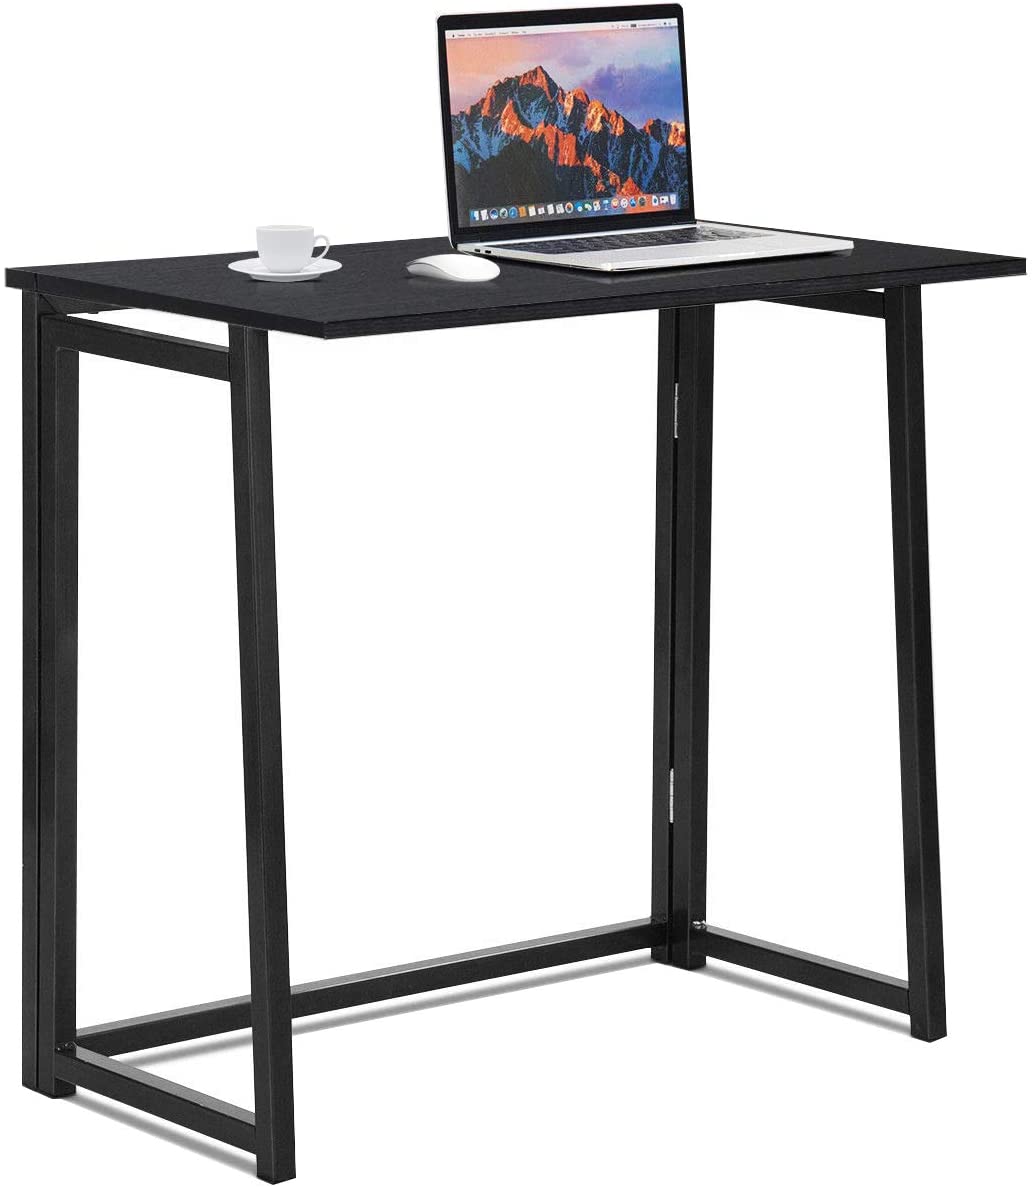 Tangkula Small Foldable Computer Desk, Home Office Laptop Table Writing Desk, Compact Study Reading Table for Small Space, No Assembly Folding Desk (Black)